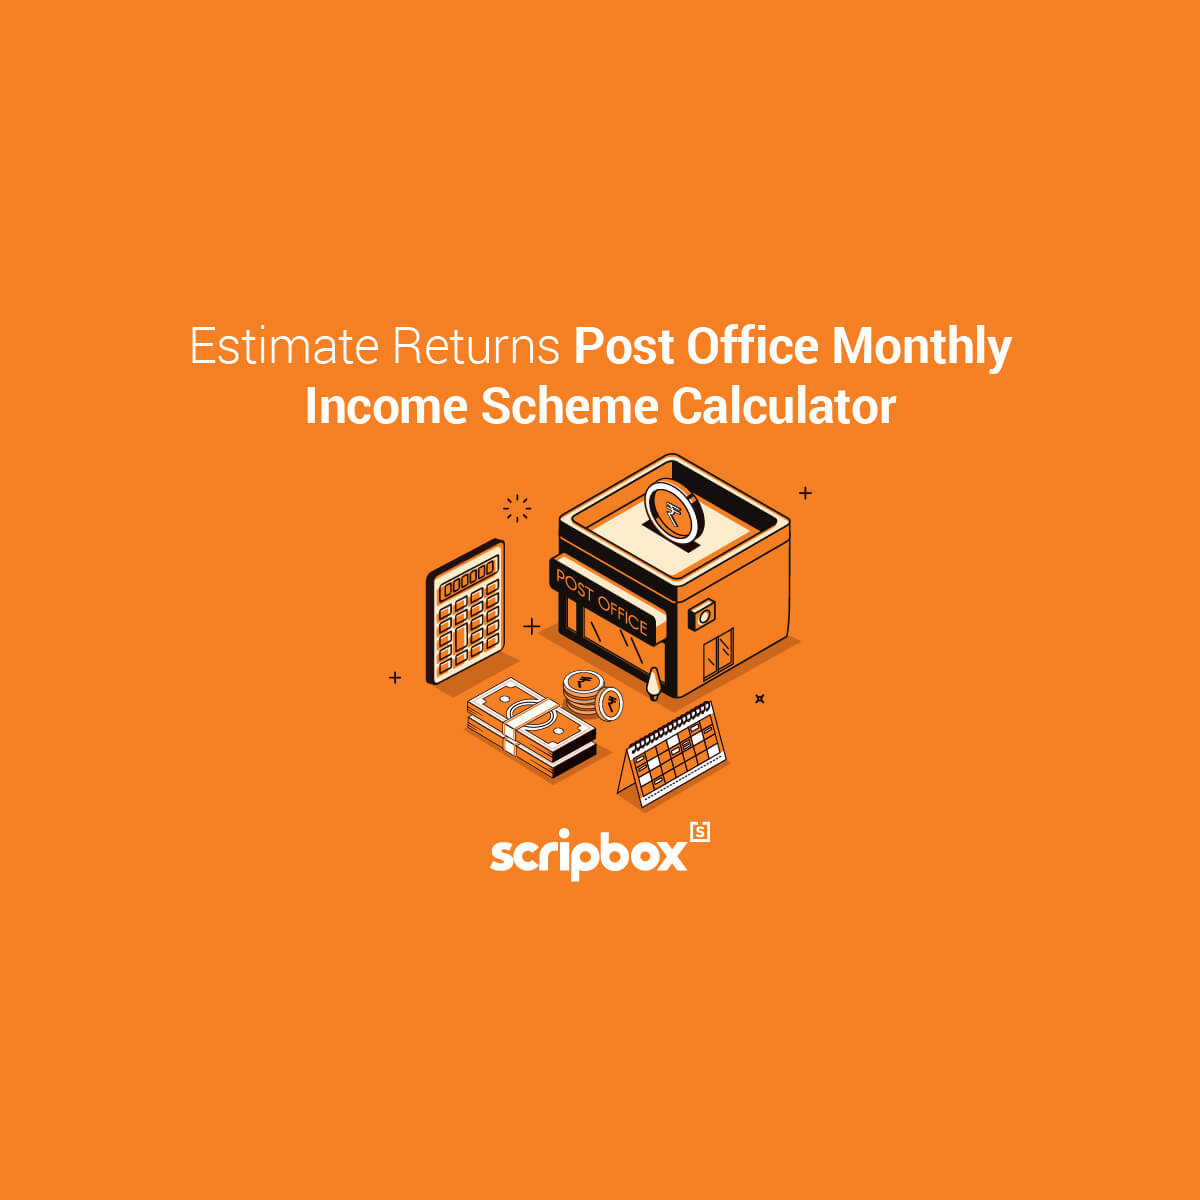 post office monthly income scheme calculator